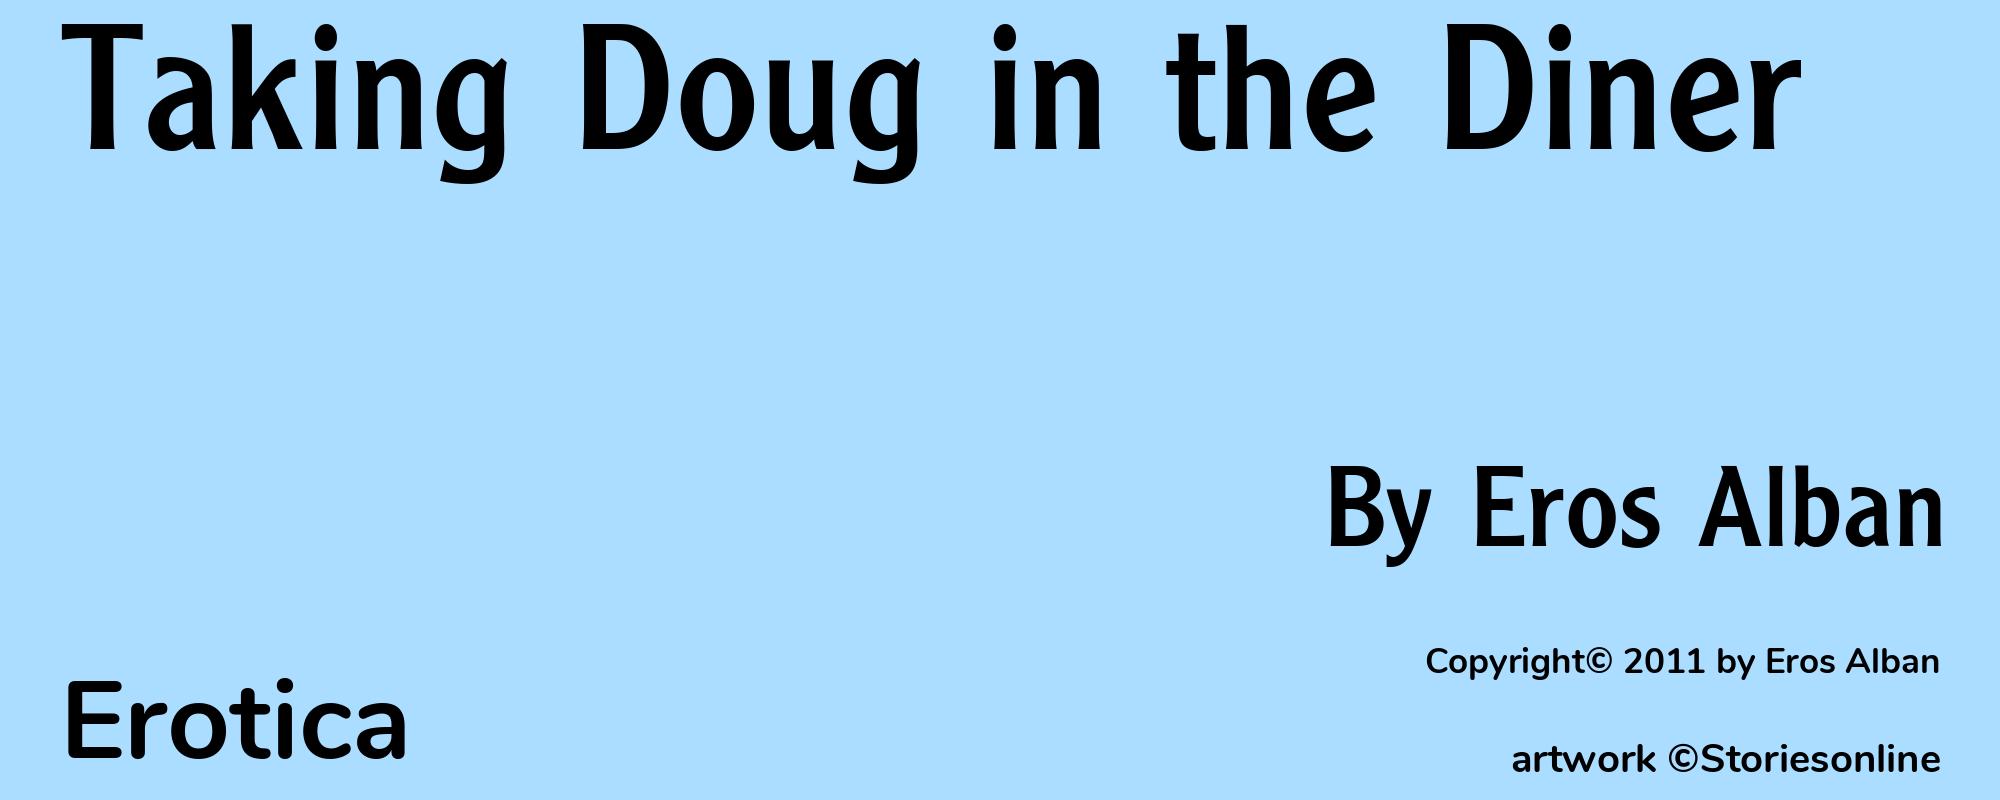 Taking Doug in the Diner - Cover